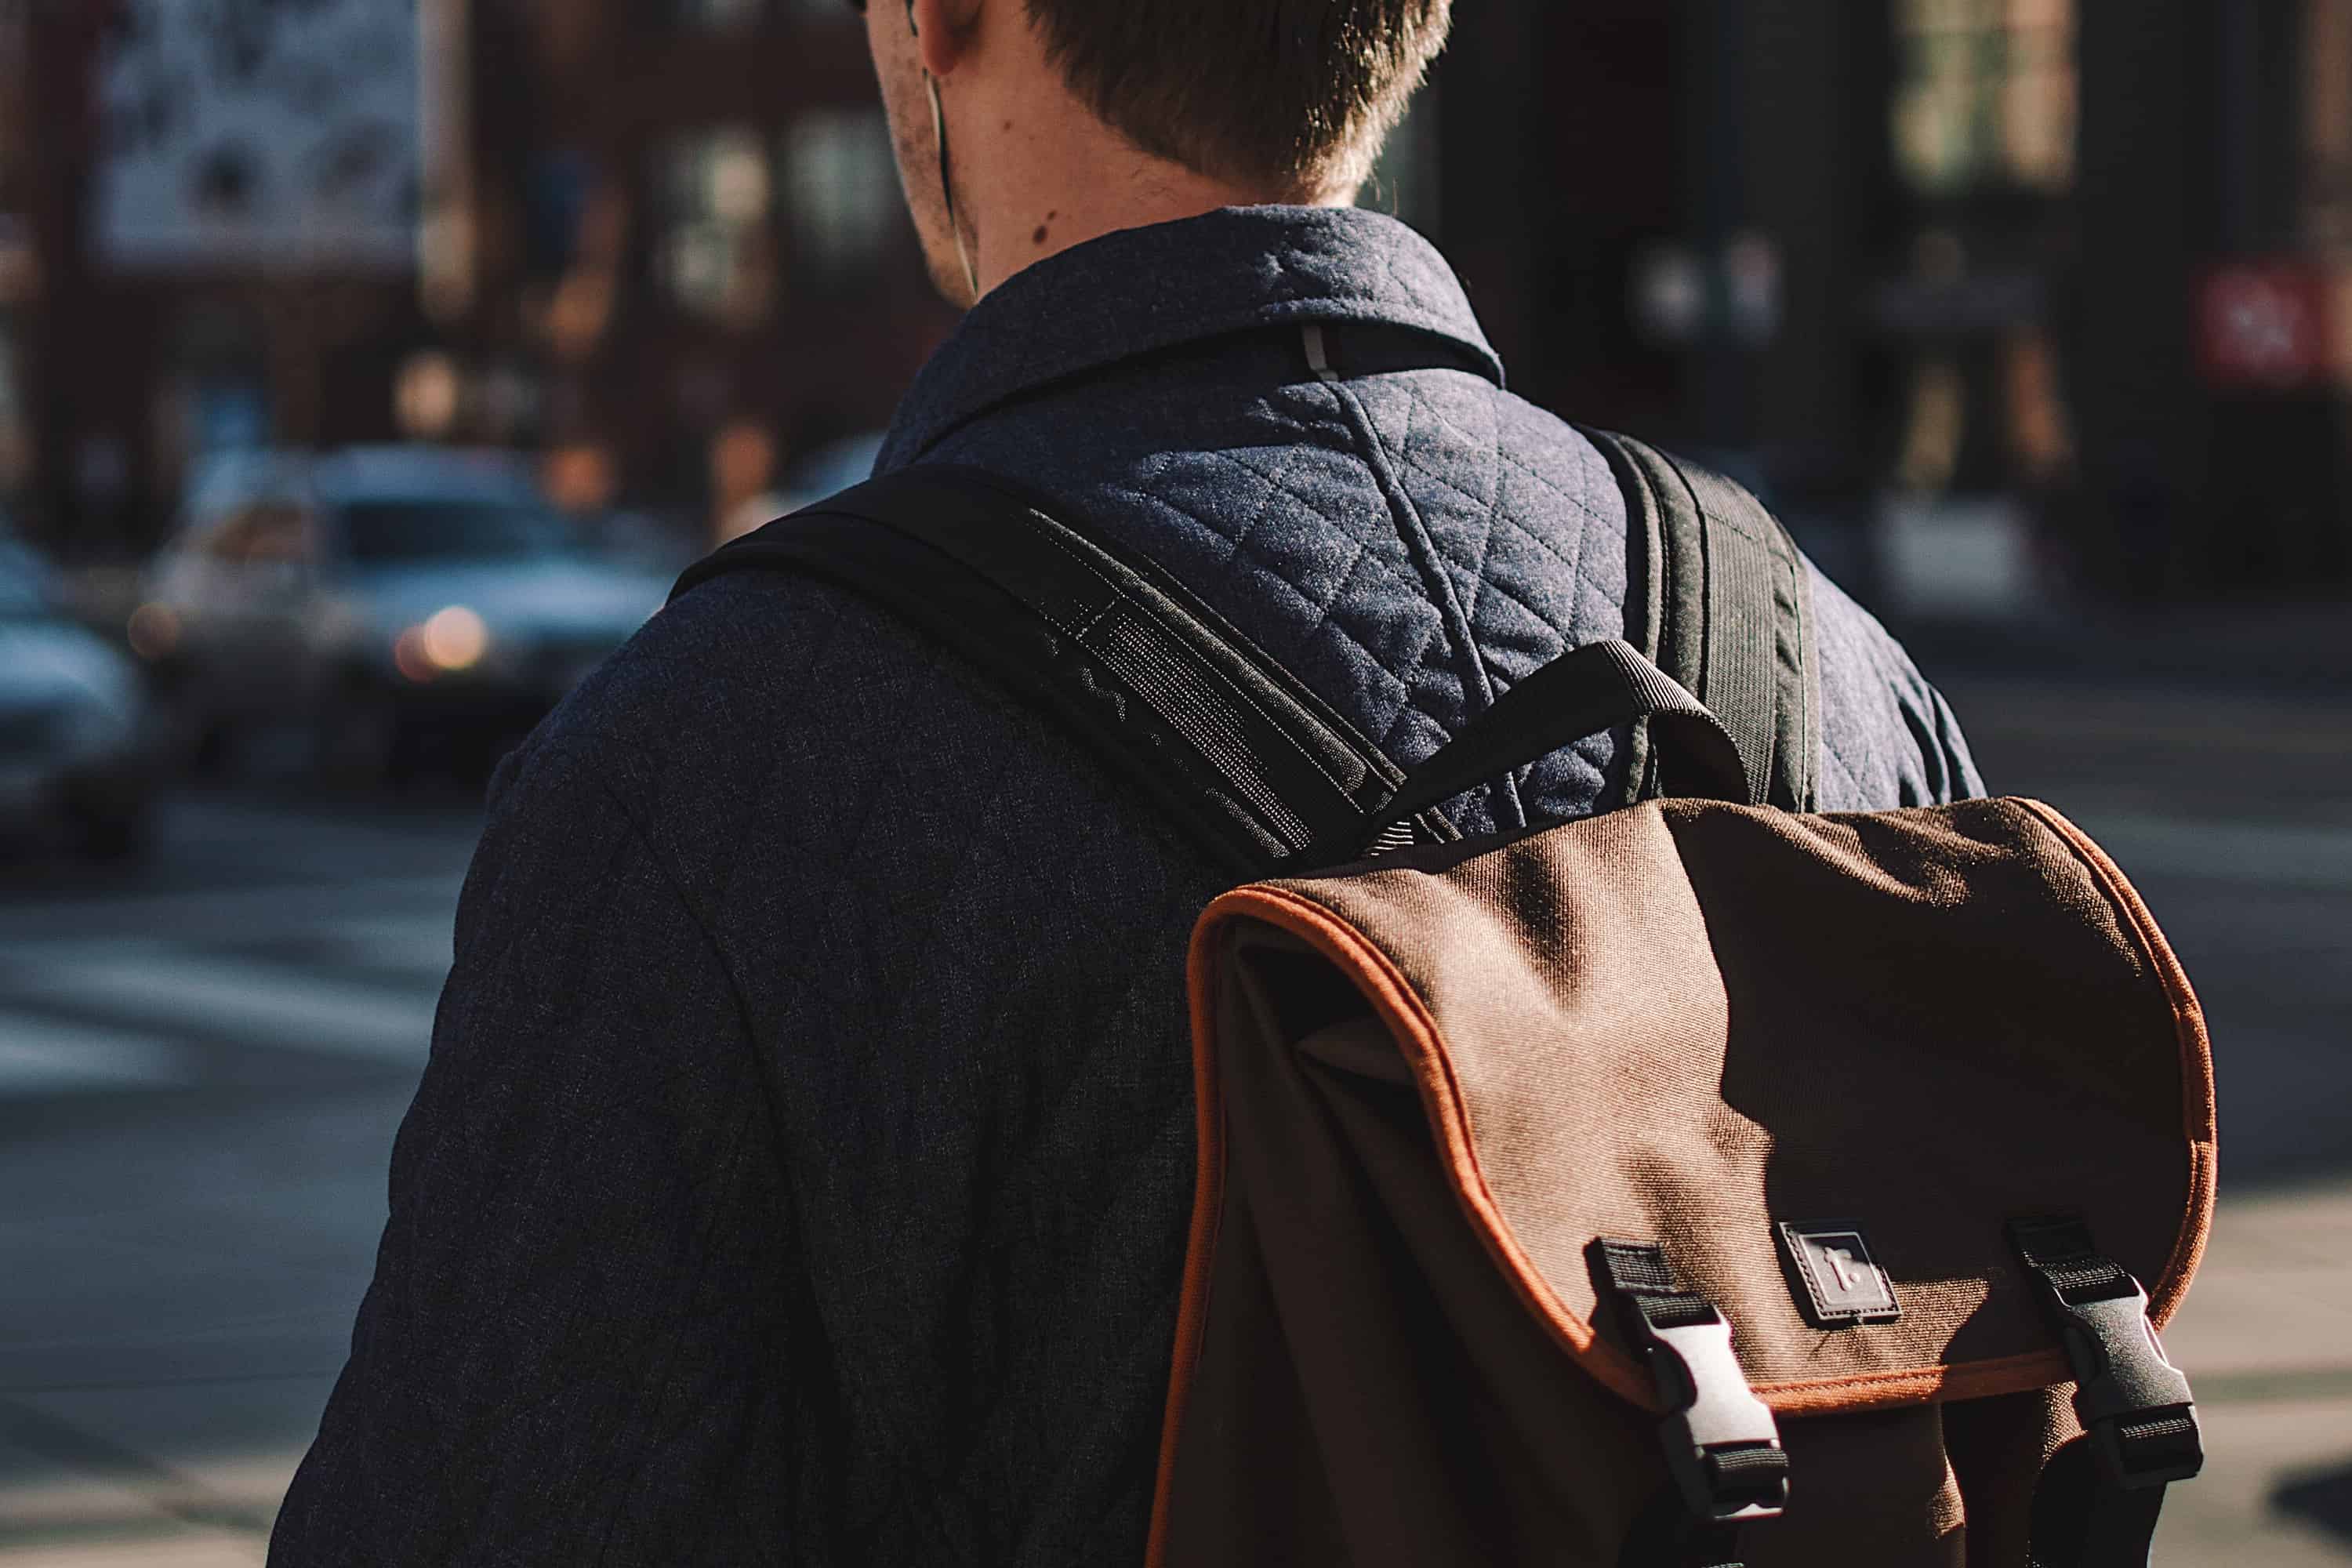 Young man wearing backpack for MAN'edged Magazine Editor's Pick